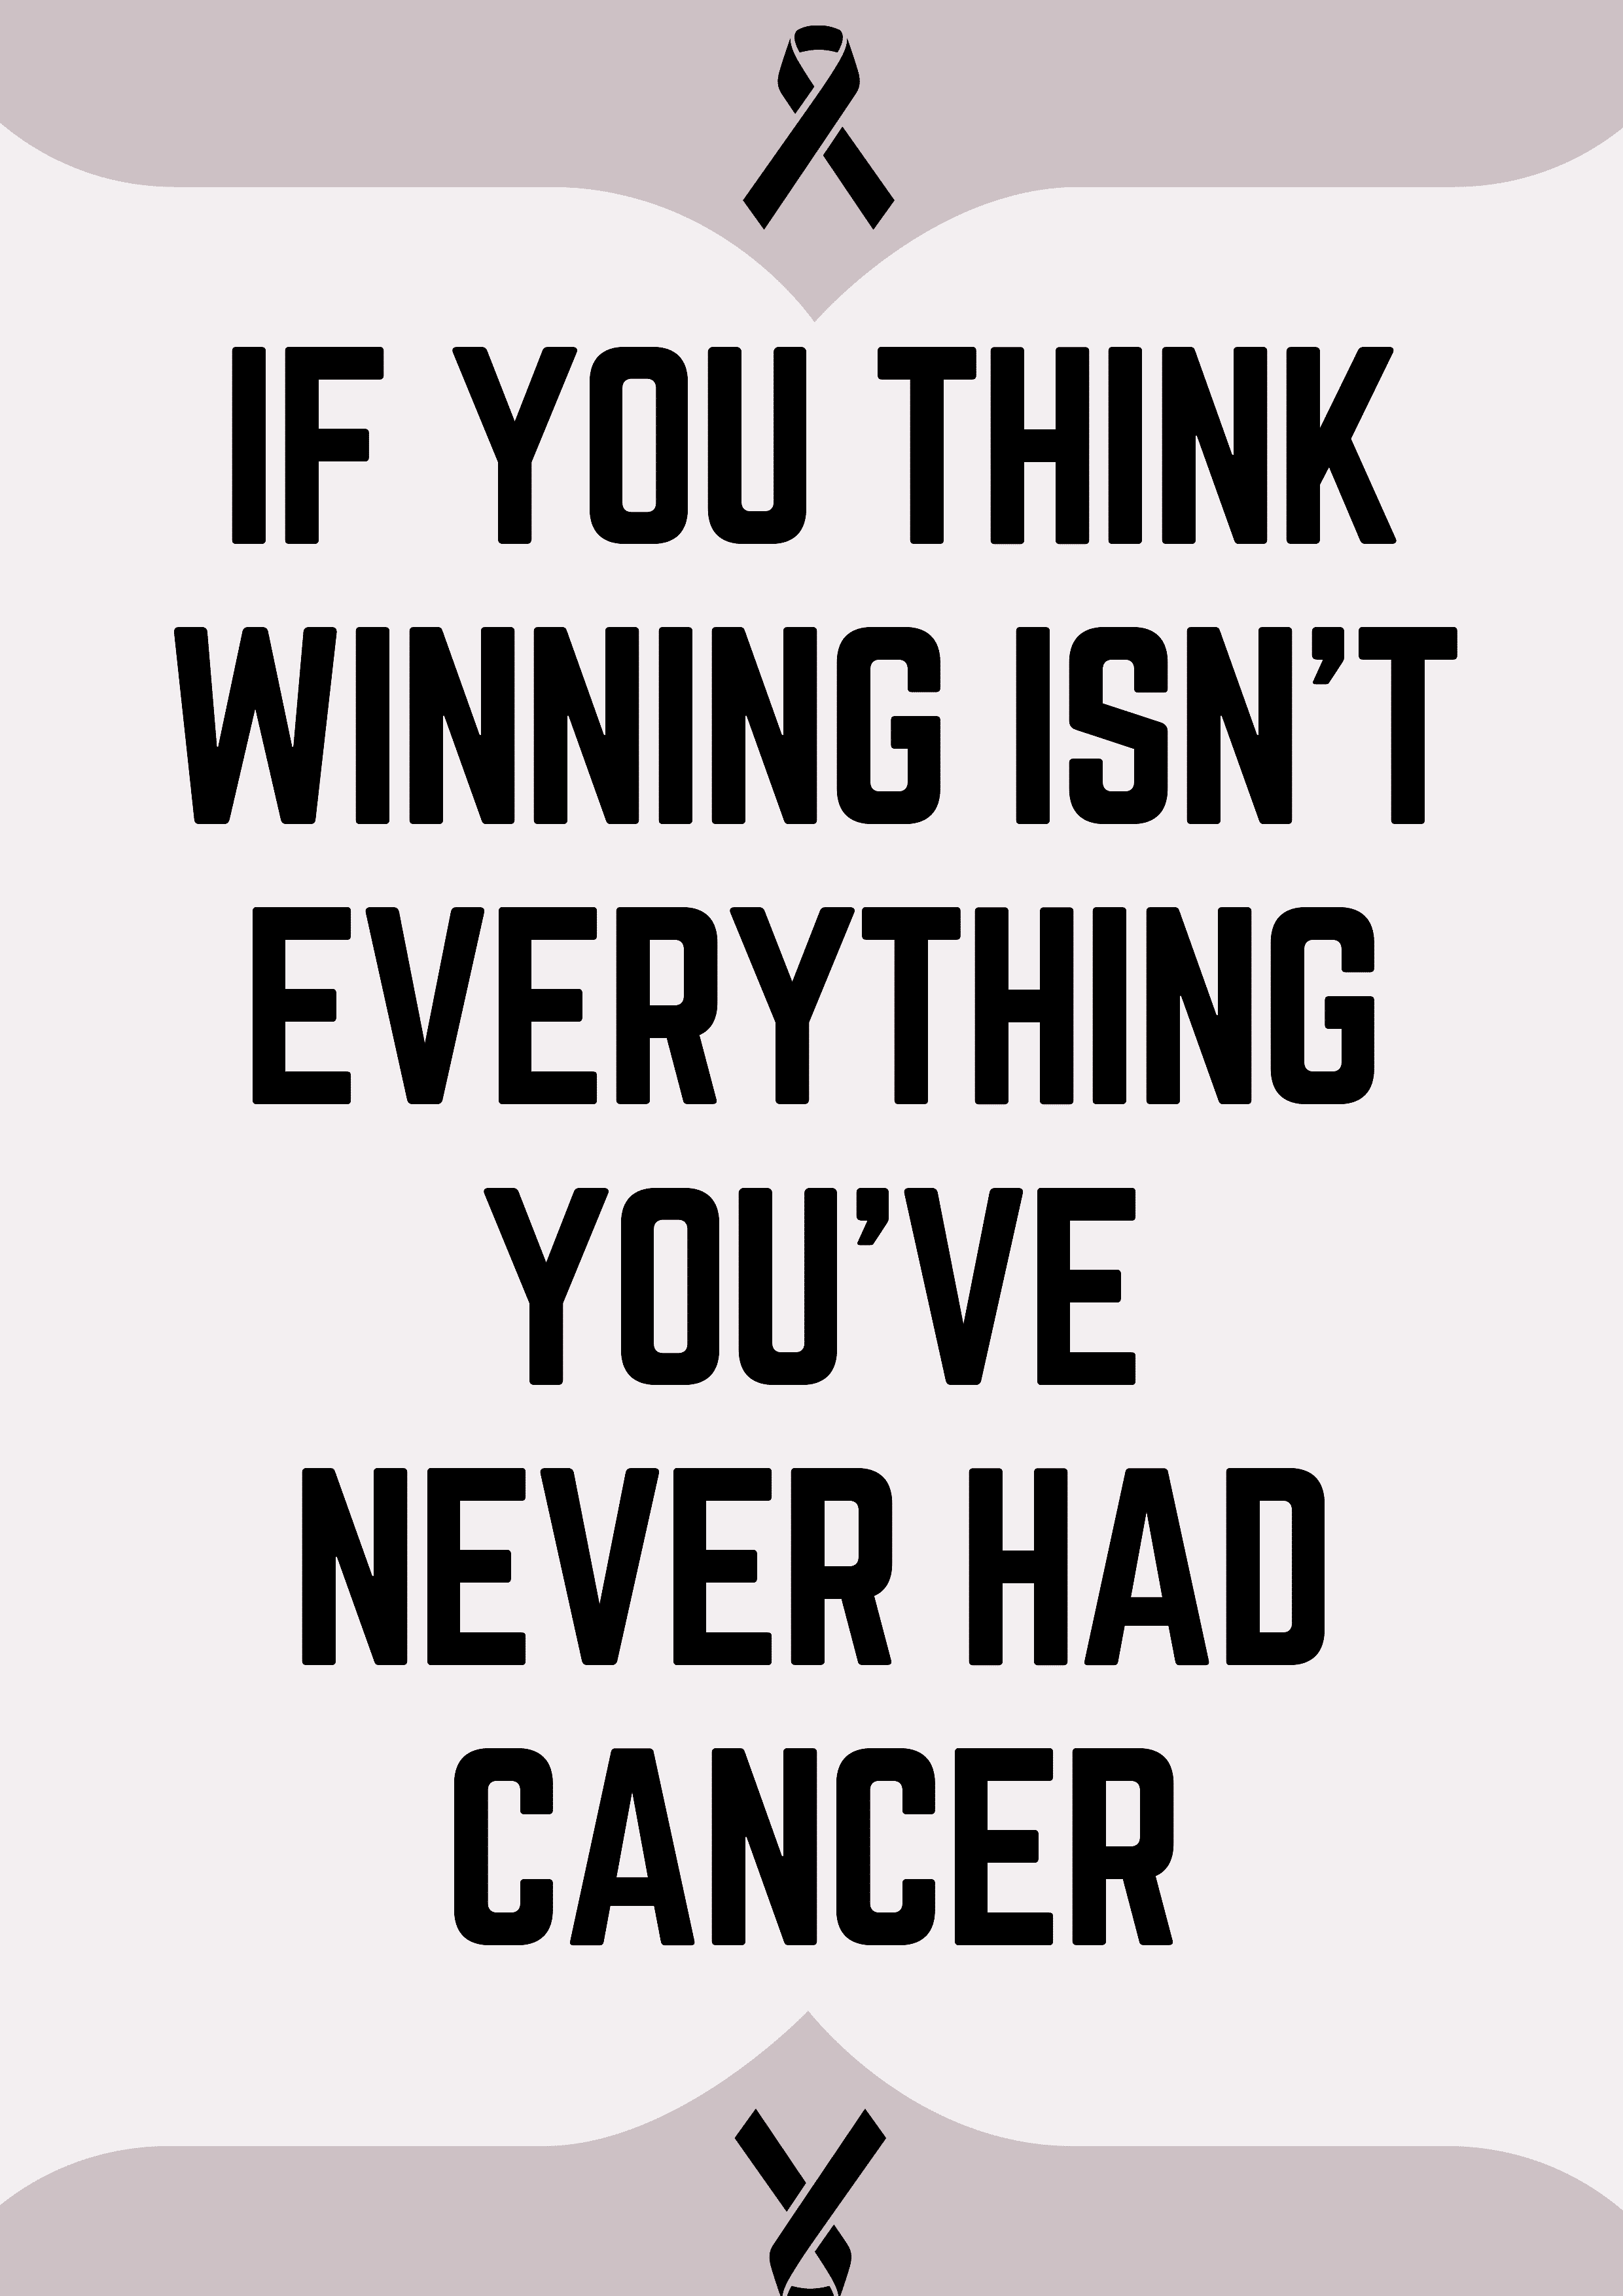 If you think winning isnt everything, you've never had cancer